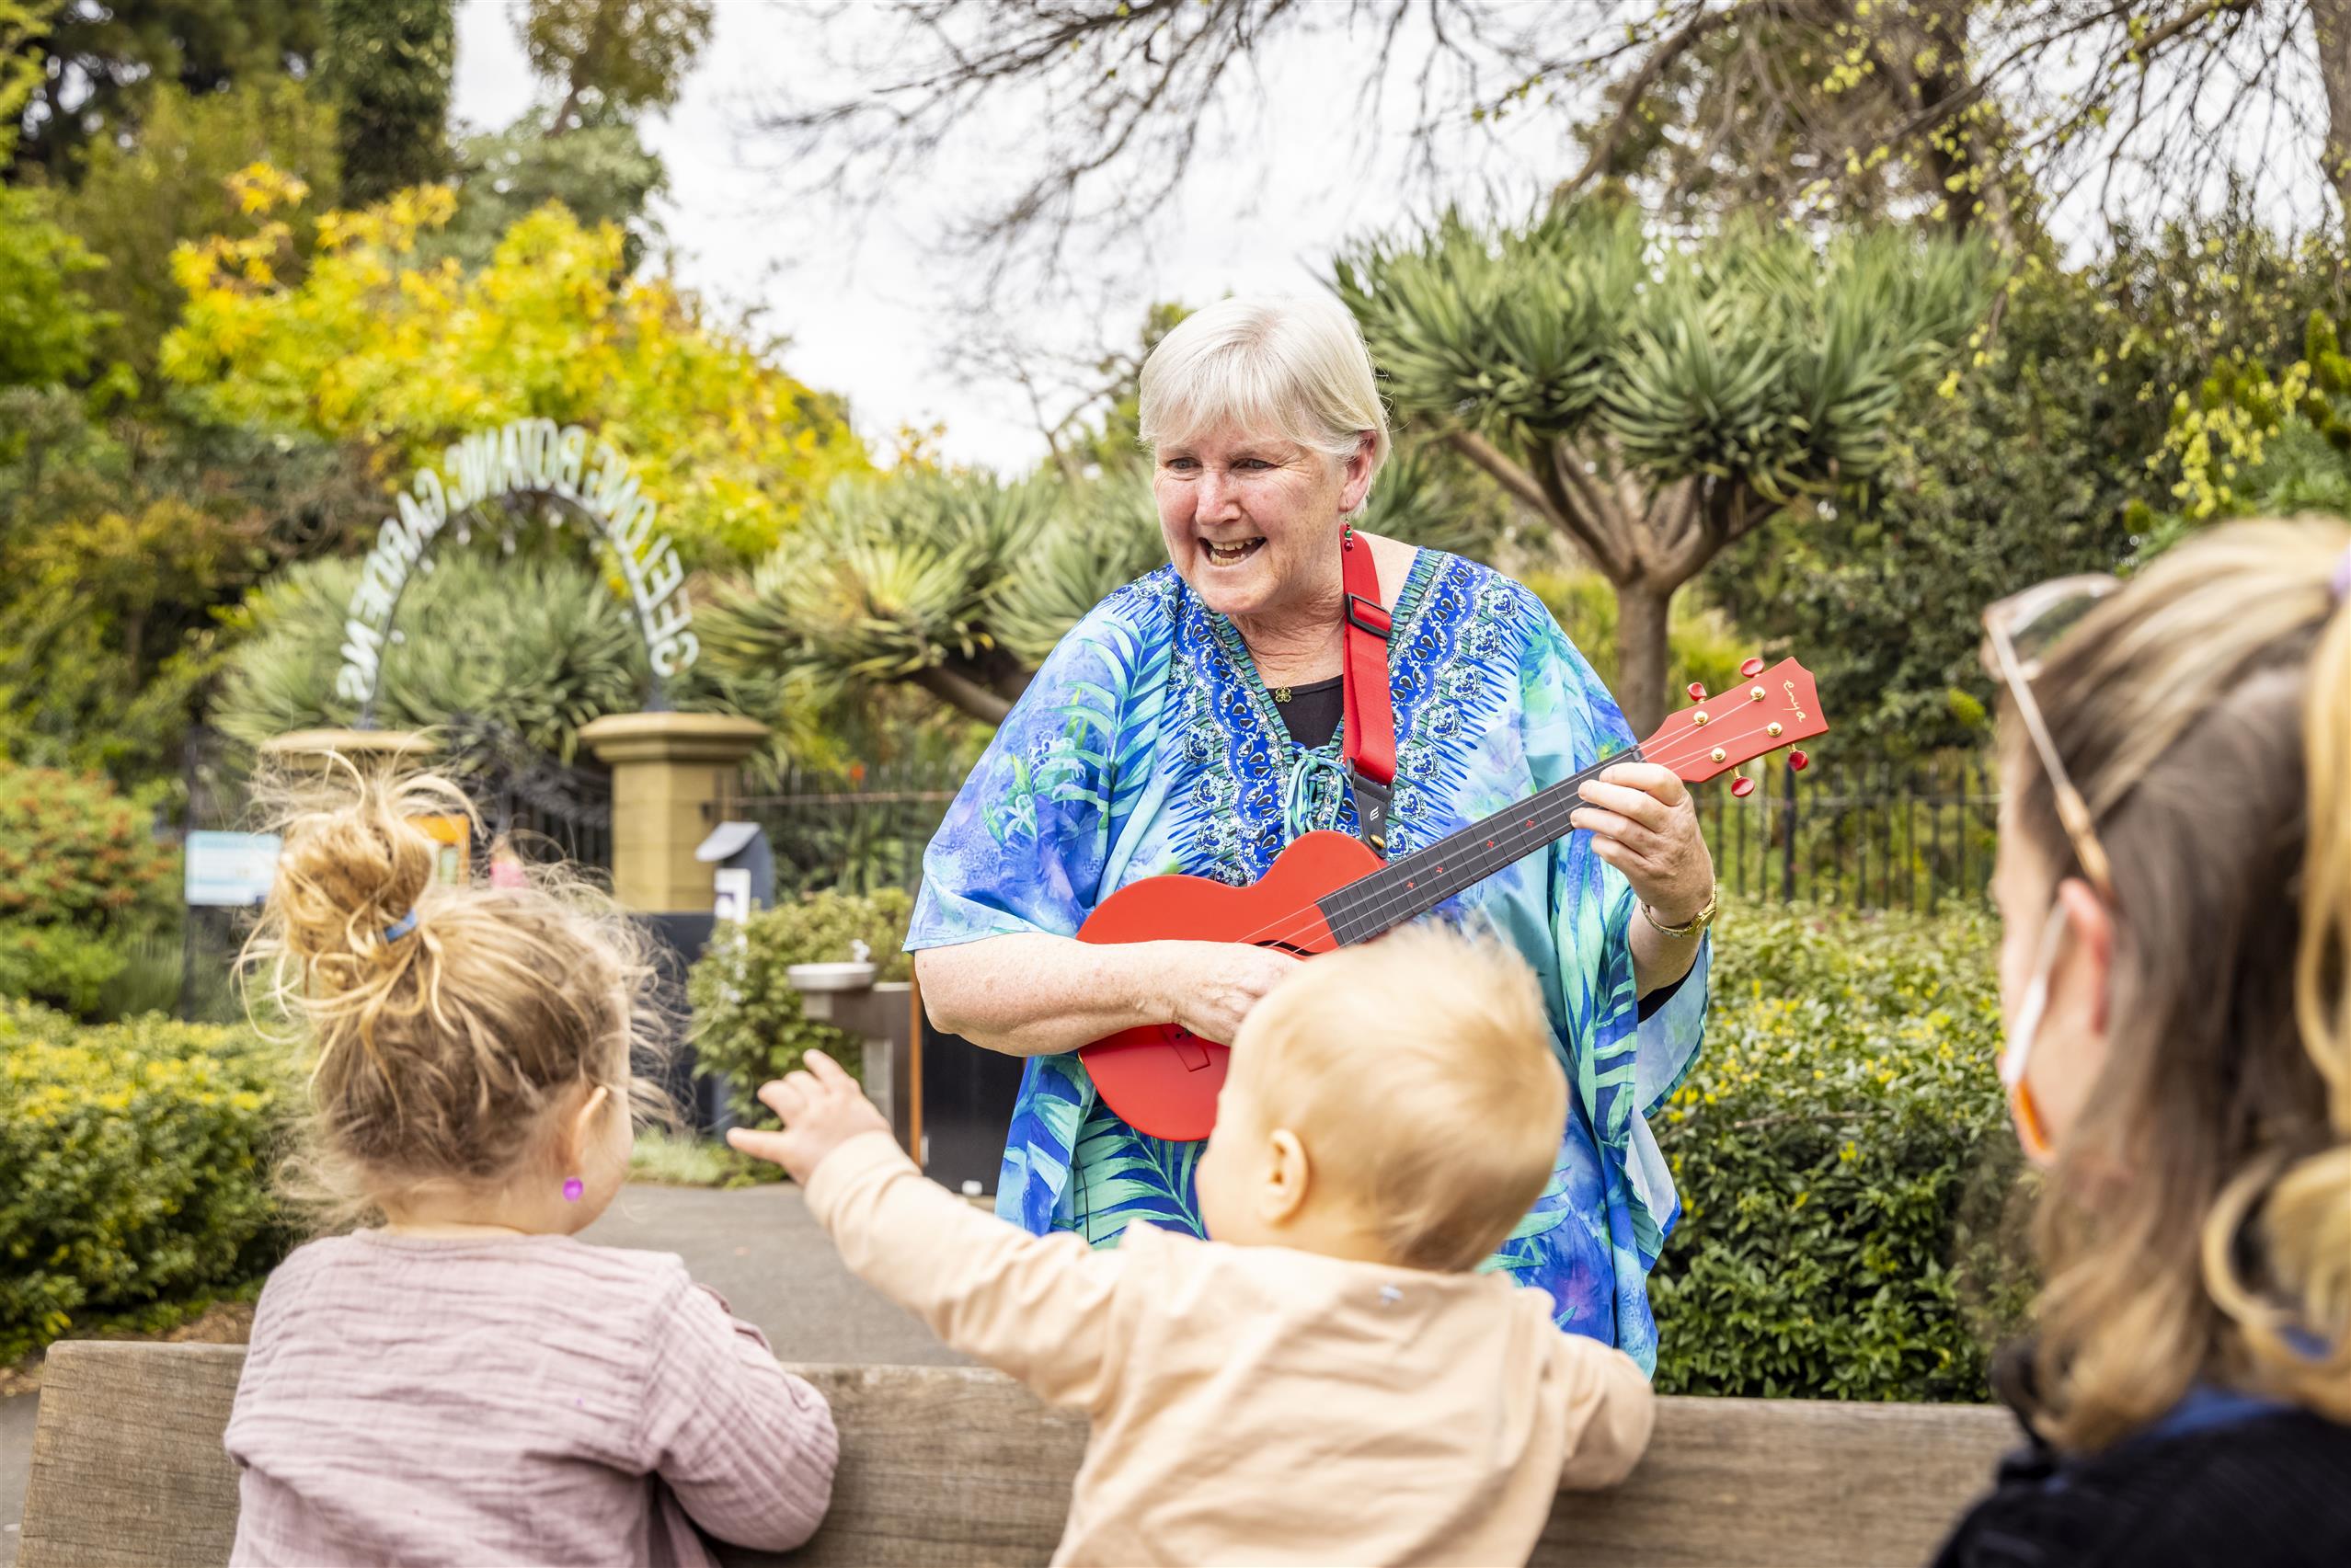 Granny Lee sings on the ukulele in the gardens to a group of young children.